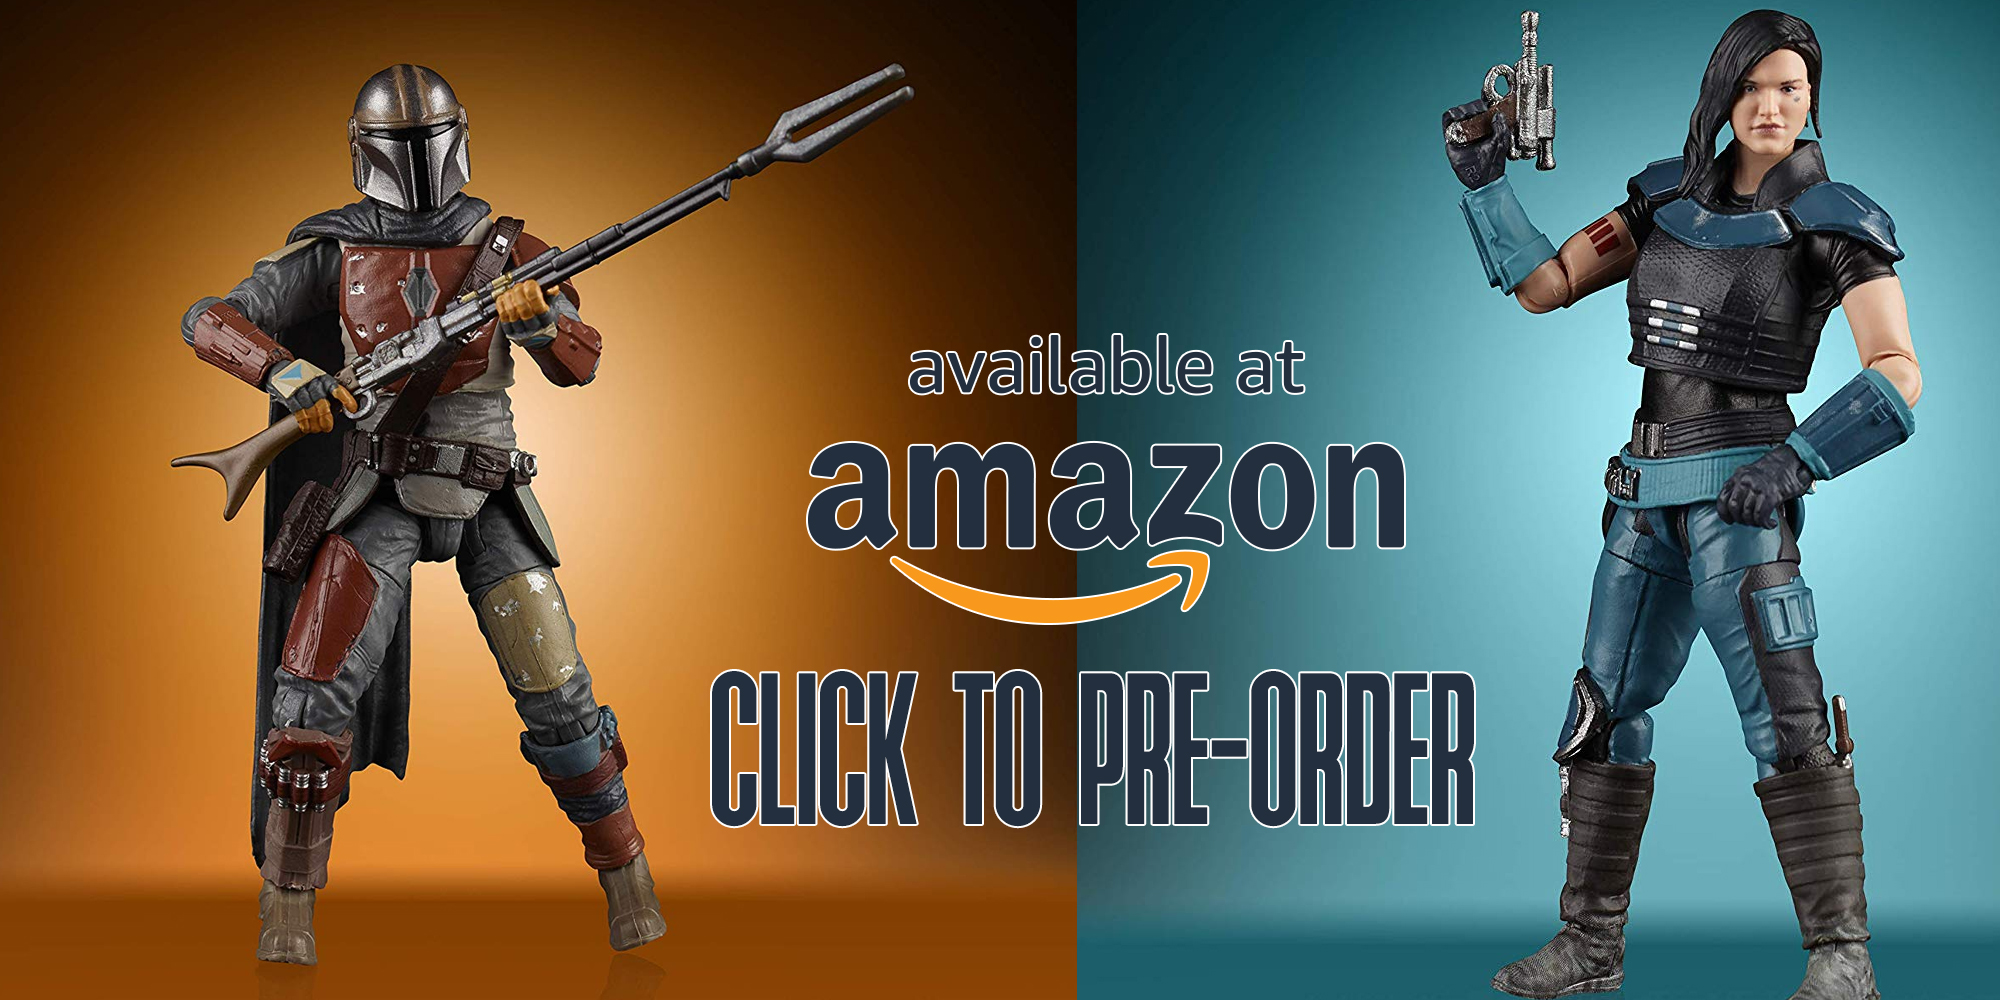 New Vintage Collection And Black Series Figures Are Up On Amazon!